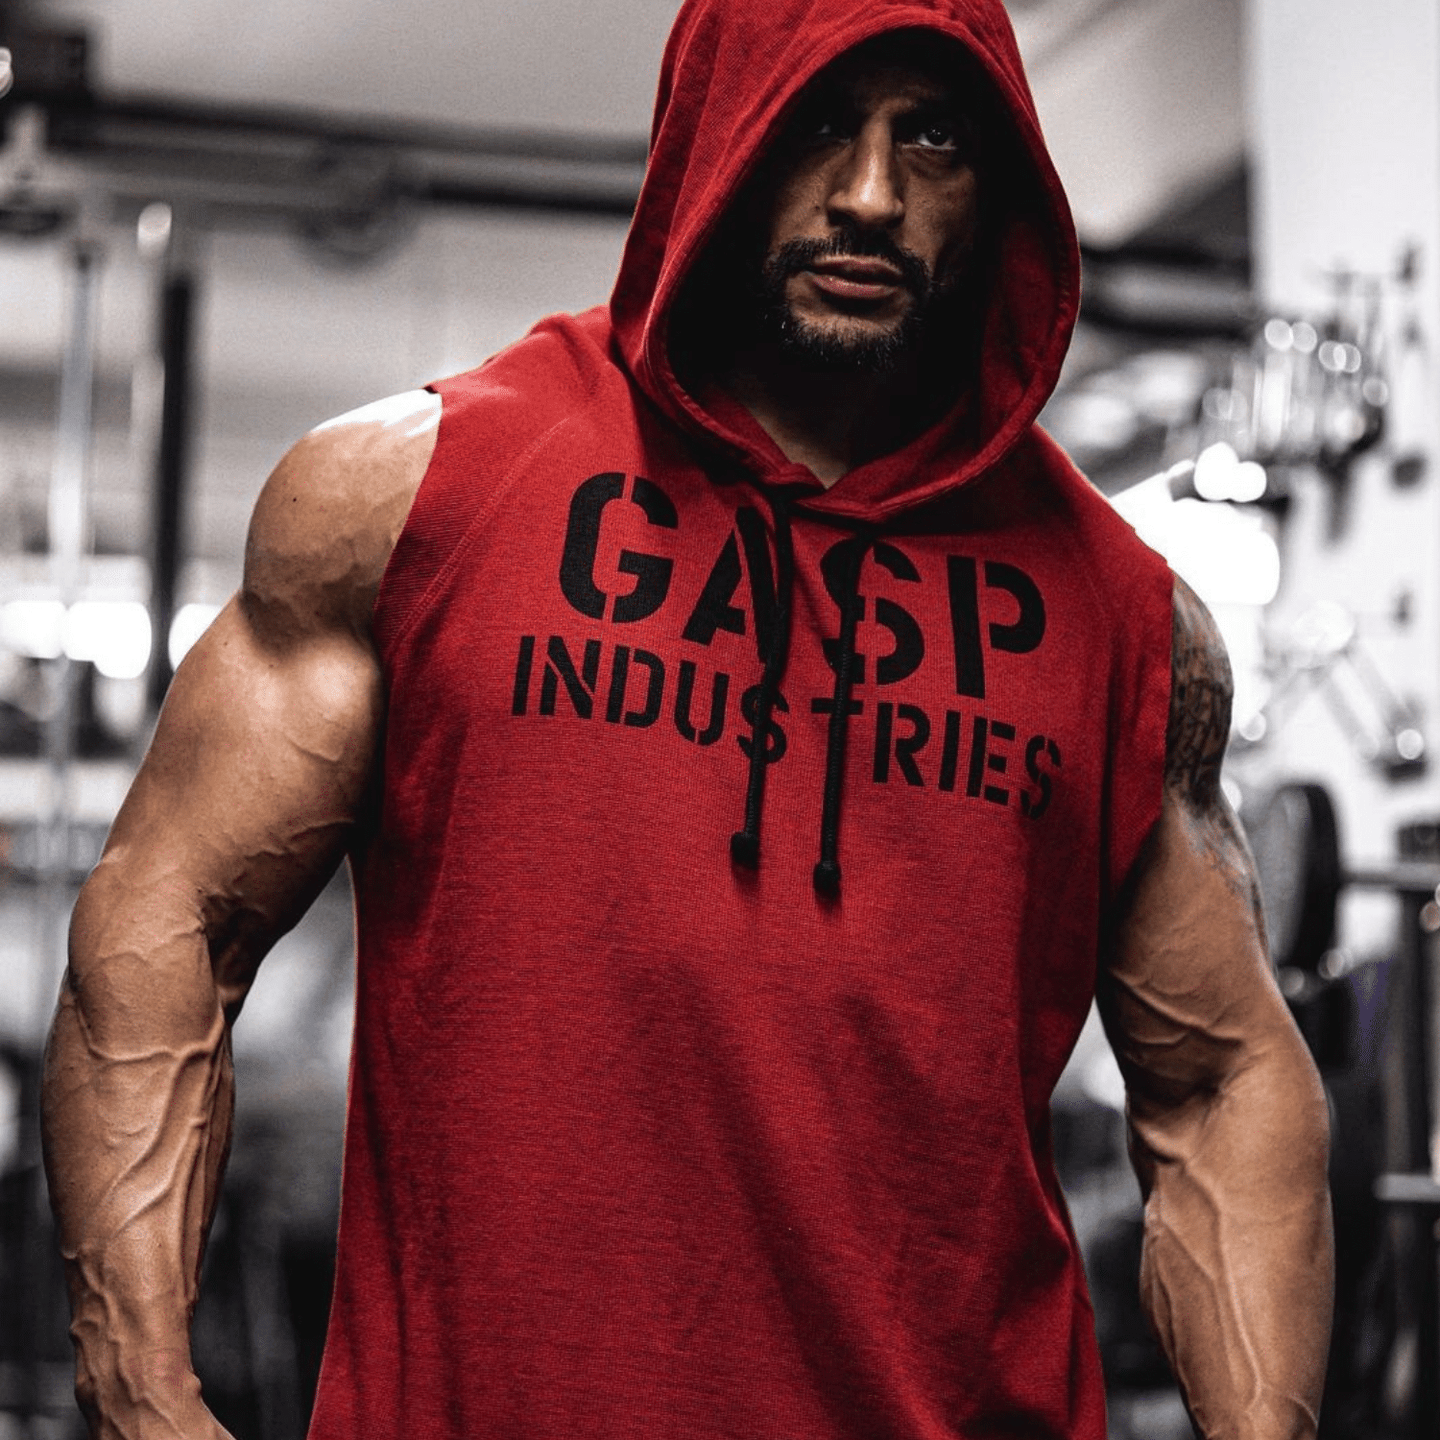 Embrace the Fall Chill with GASP Thermal Wear